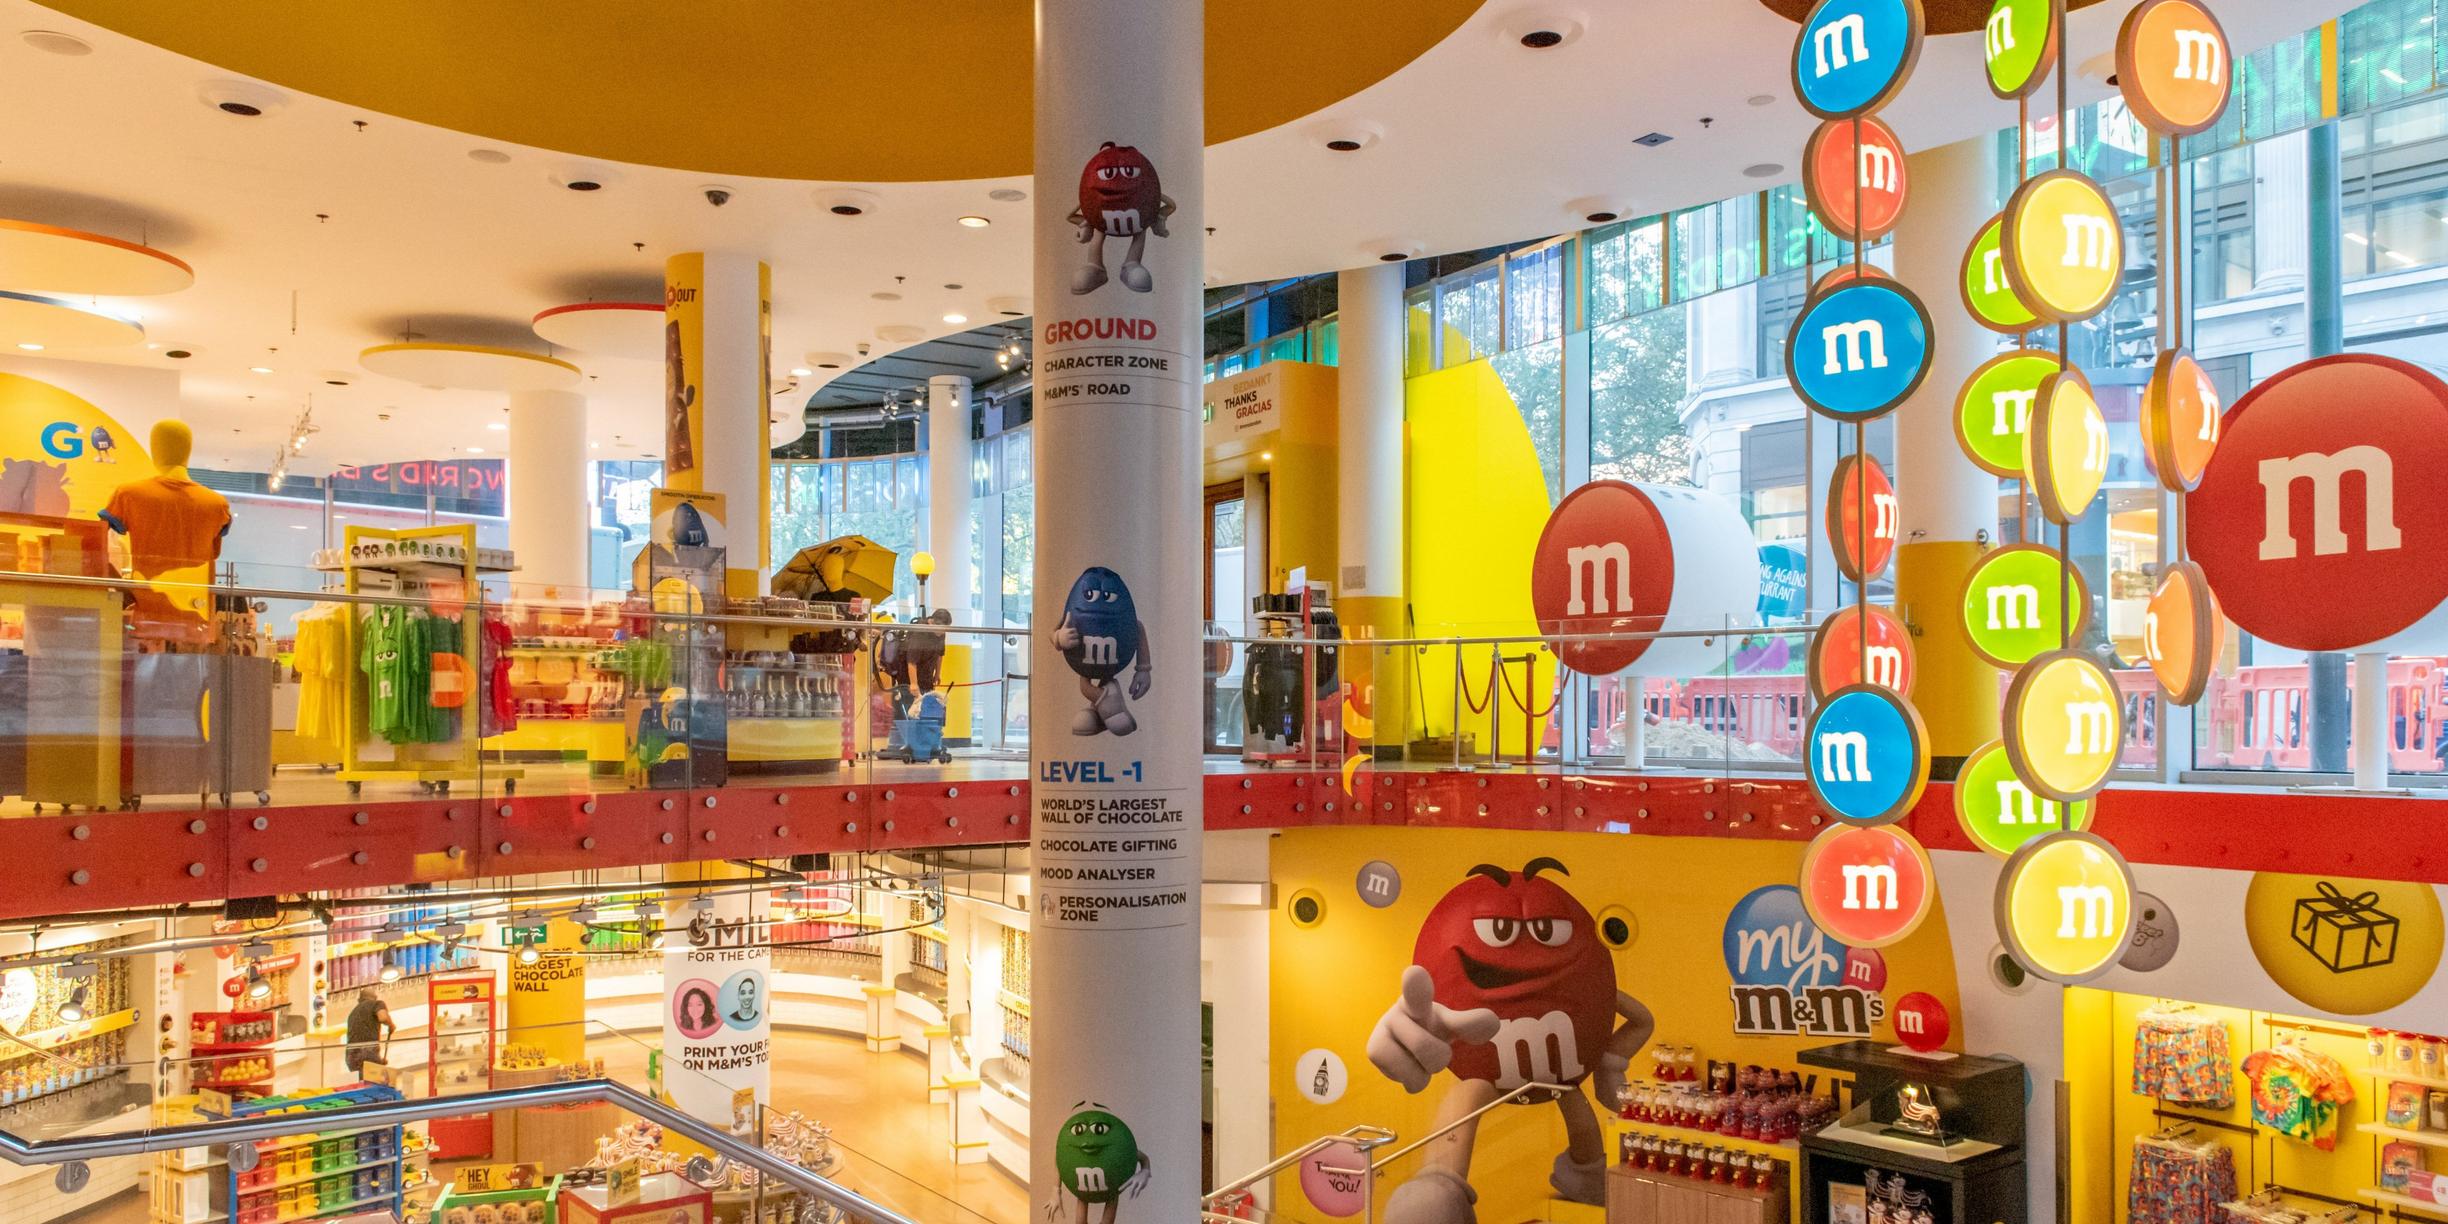 Inside View of M&M'S Store in London